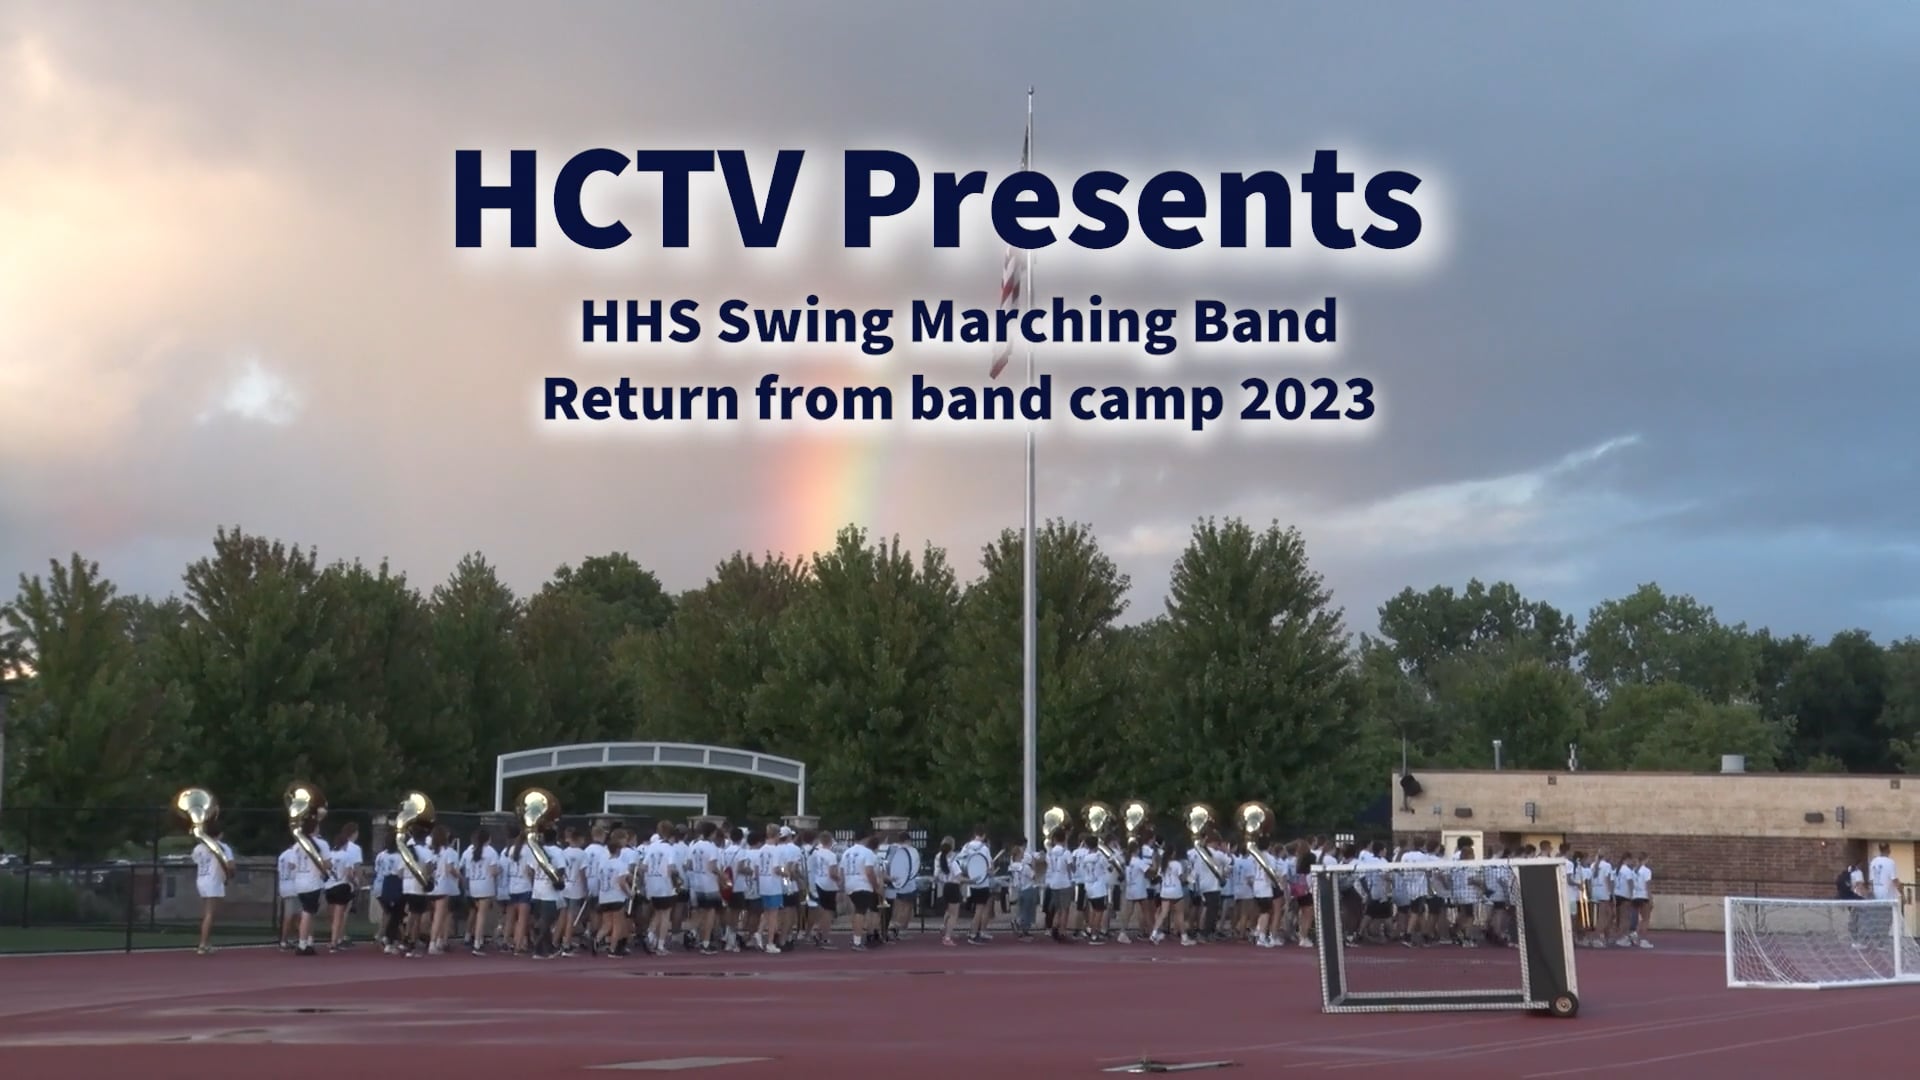 Hudson High School Swing Marching Band Return from Band Camp 2023